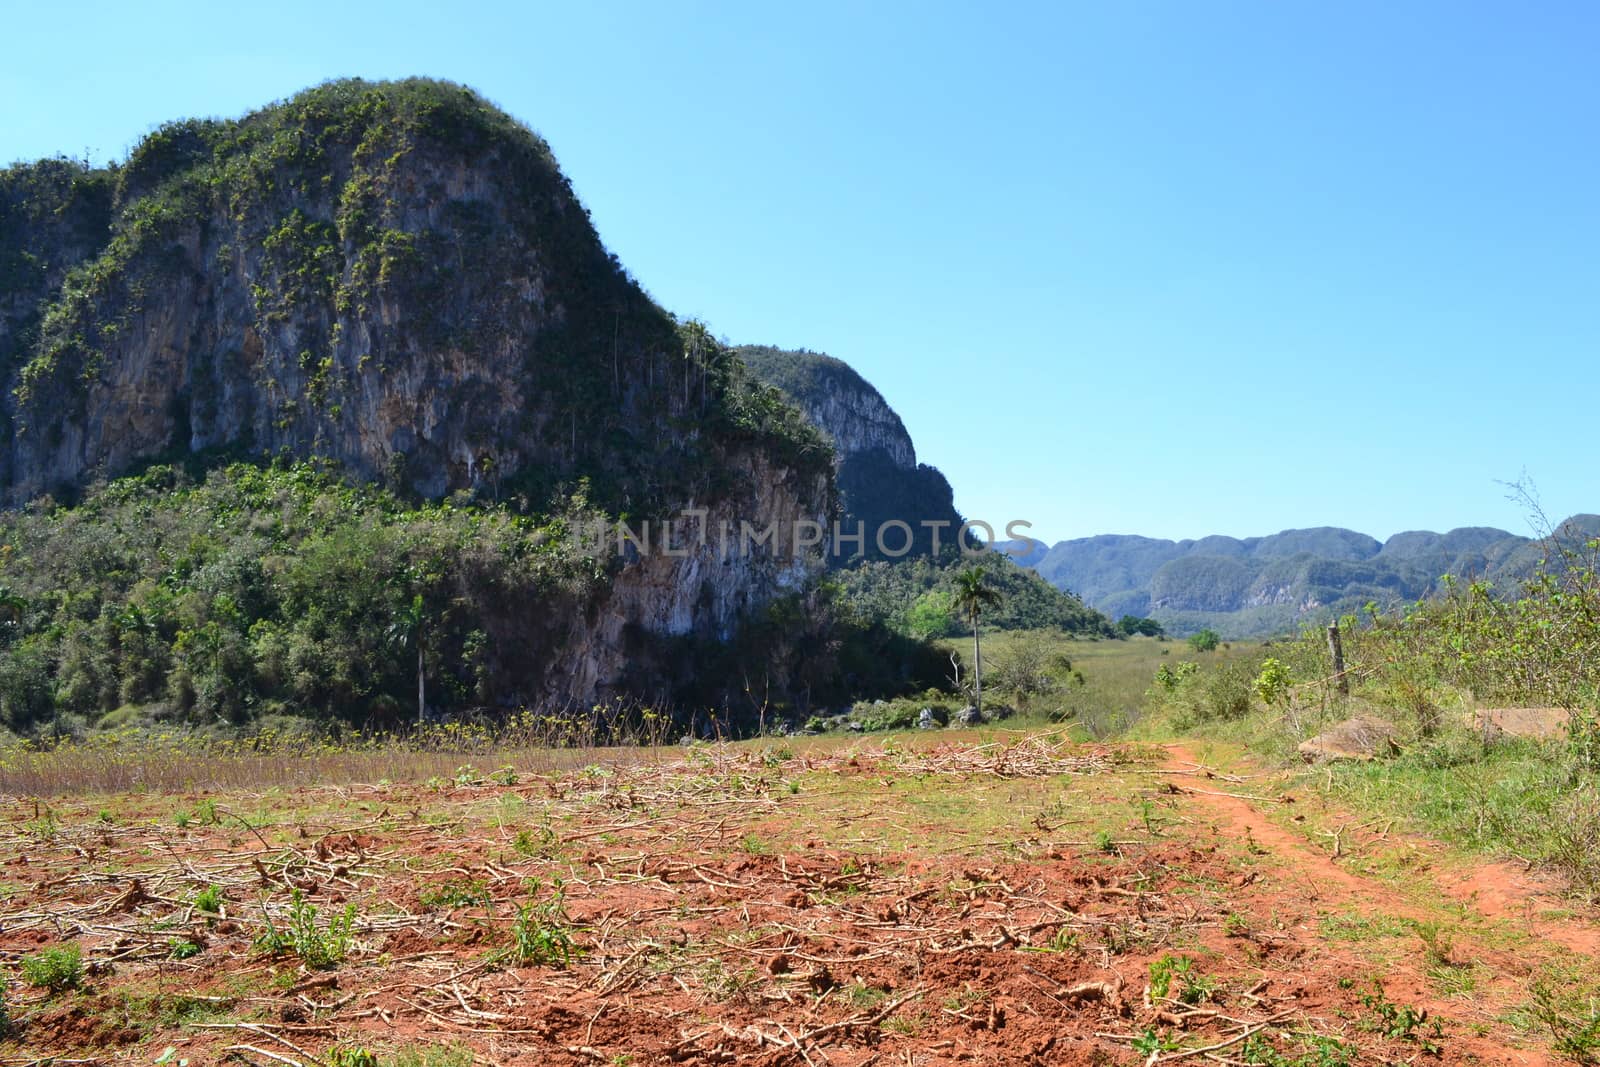 Agriculture, nature and ladscape in Vinales, Cuba. Travel and tourism.